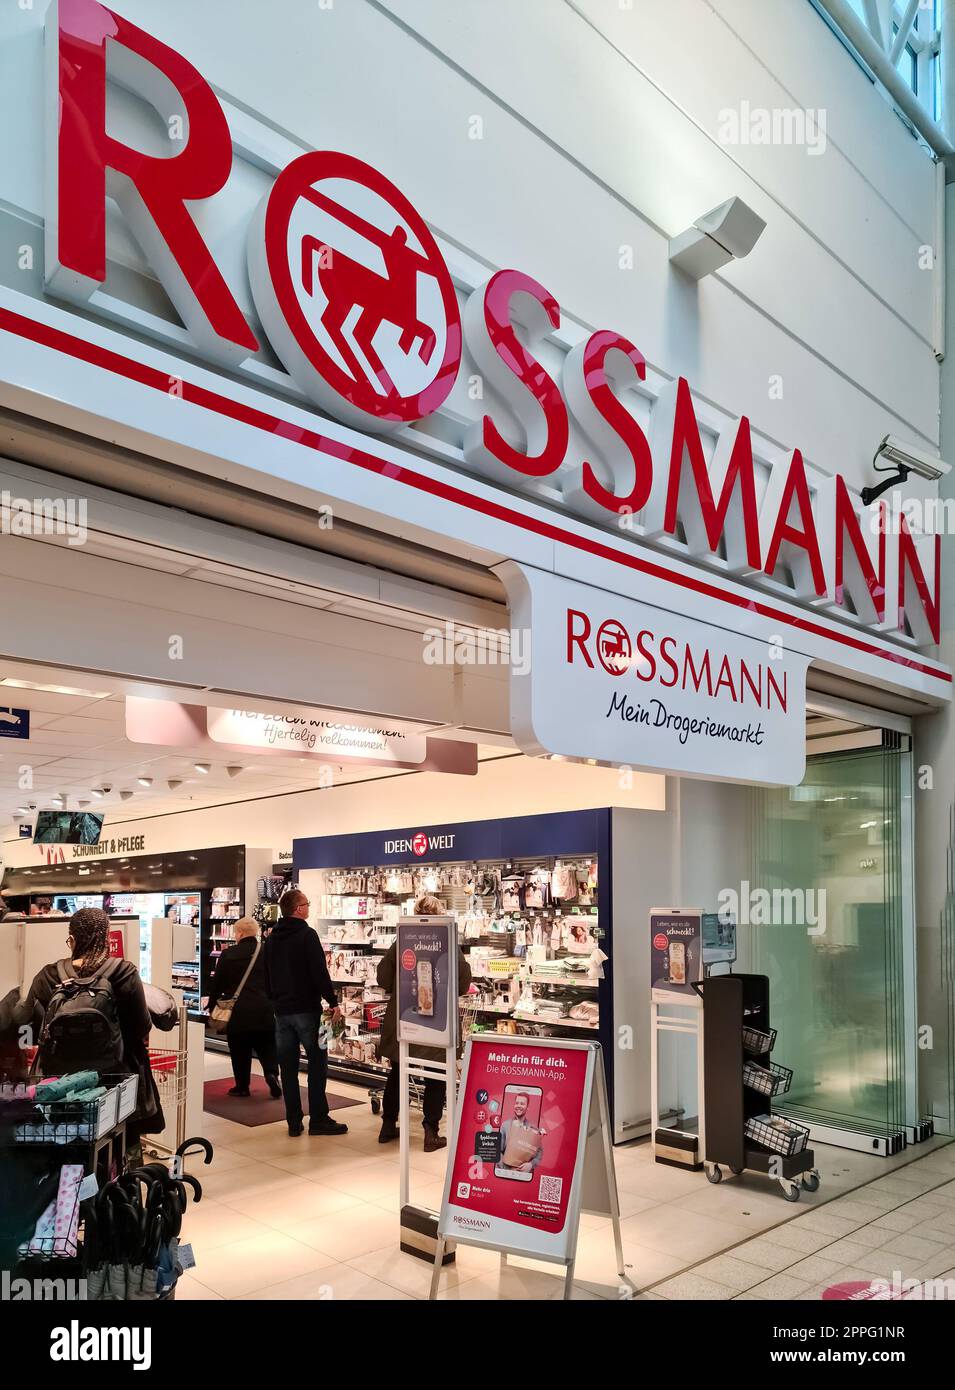 Rossmann stores in Germany 2022